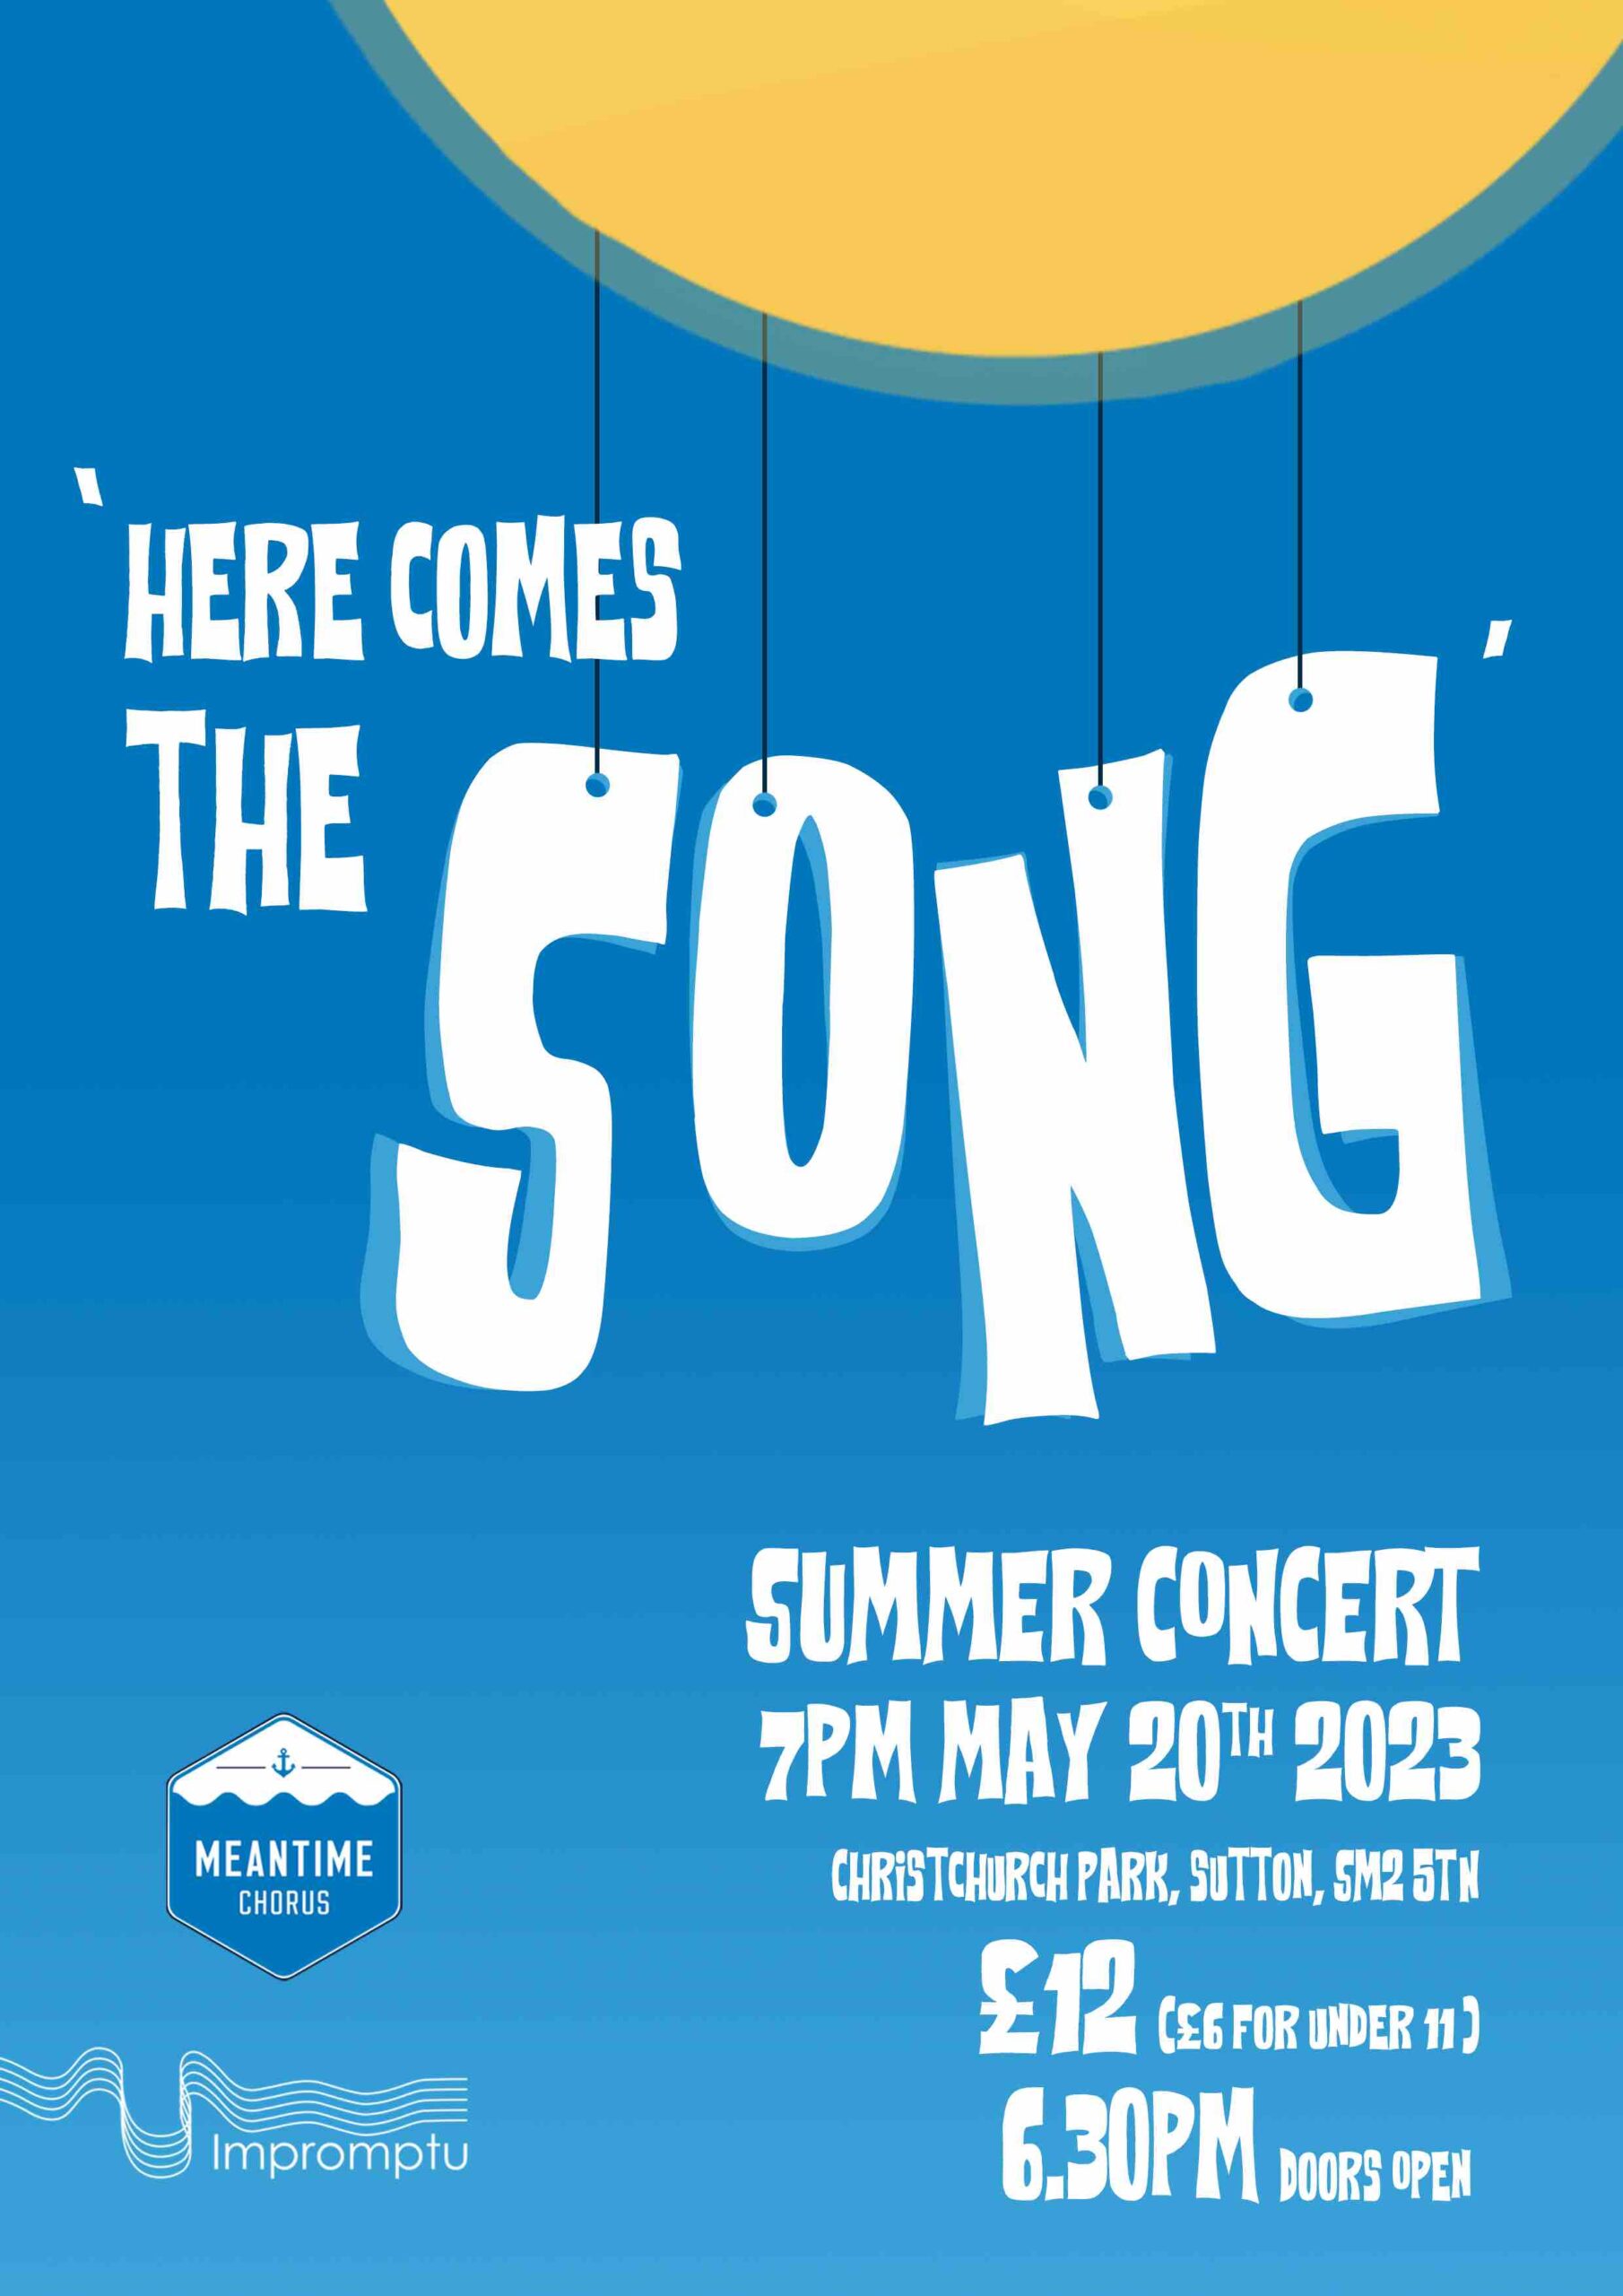 Here comes the song - Summer Concert